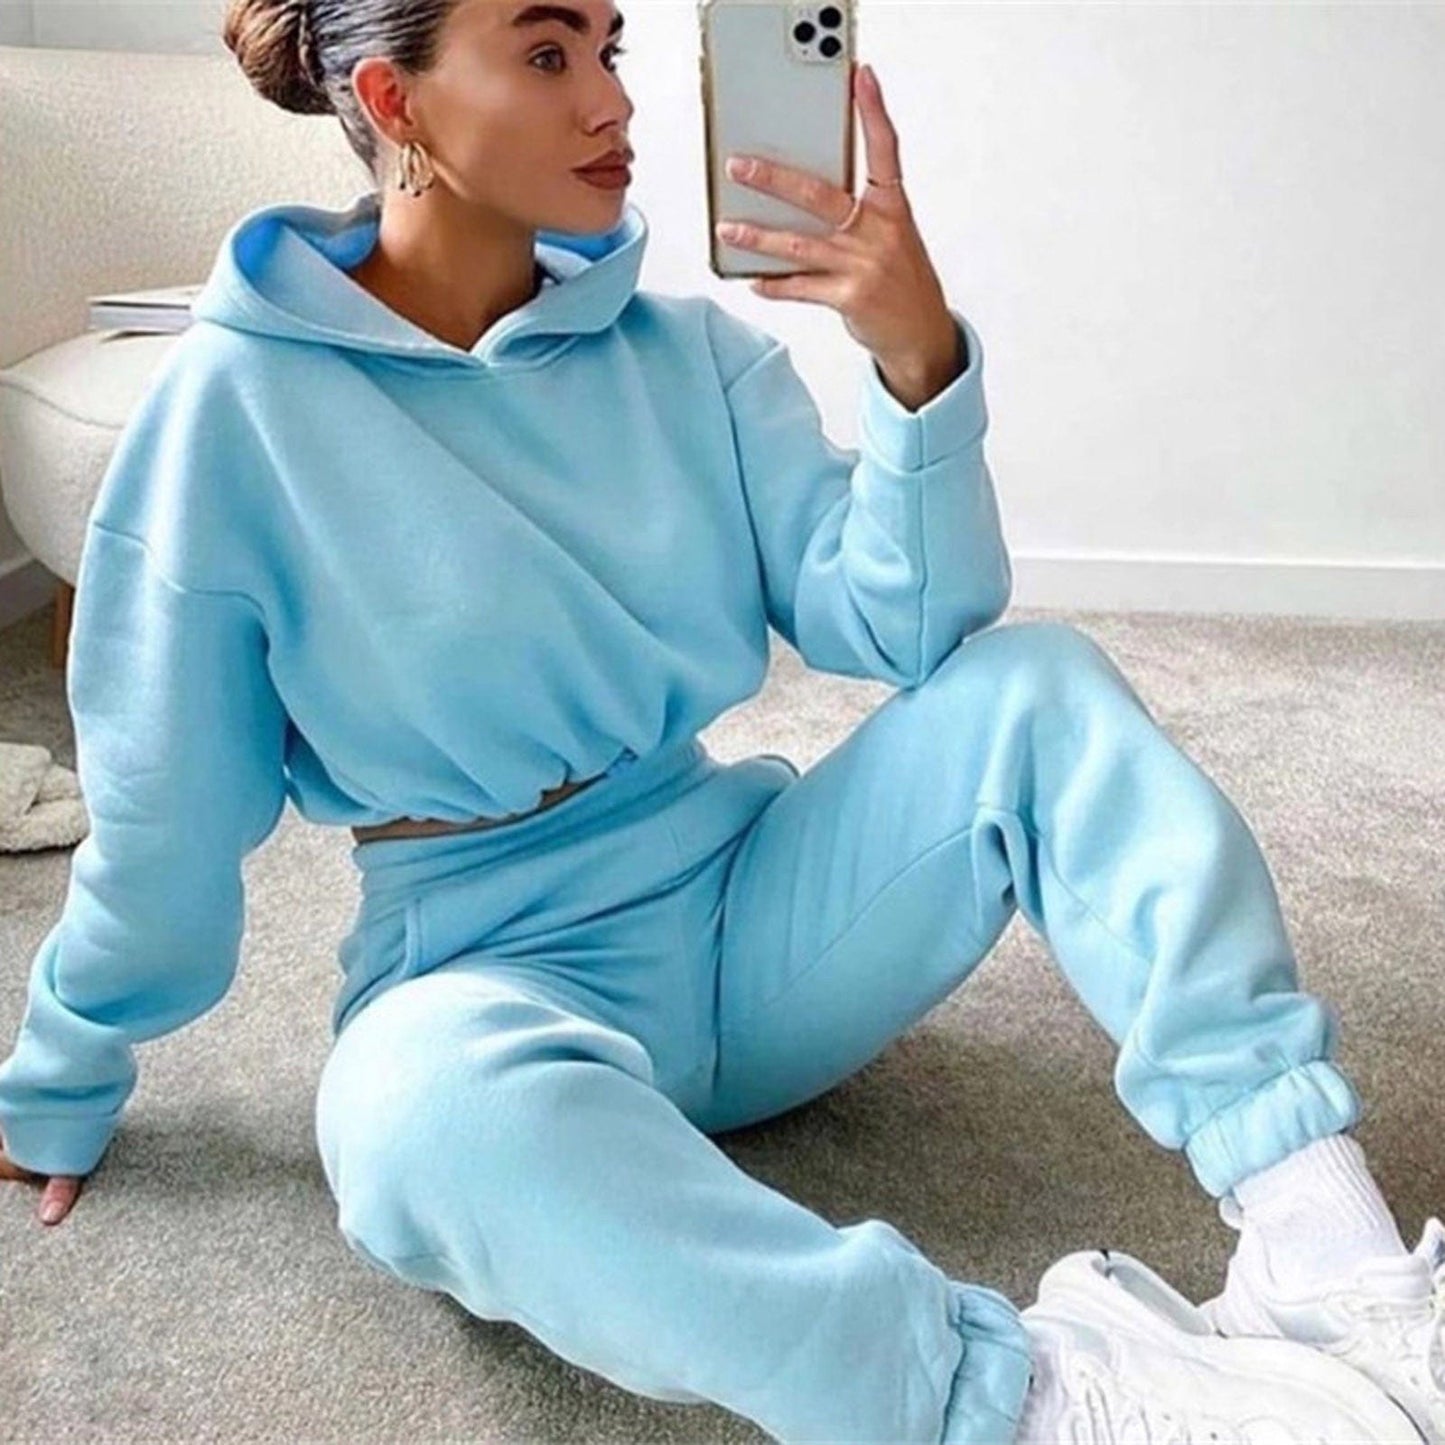 ALLRJ Jogging suit Blue / L Jogging Suits For Women 2 Piece Sweatsuits Tracksuits Sexy Long Sleeve HoodieCasual Fitness Sportswear